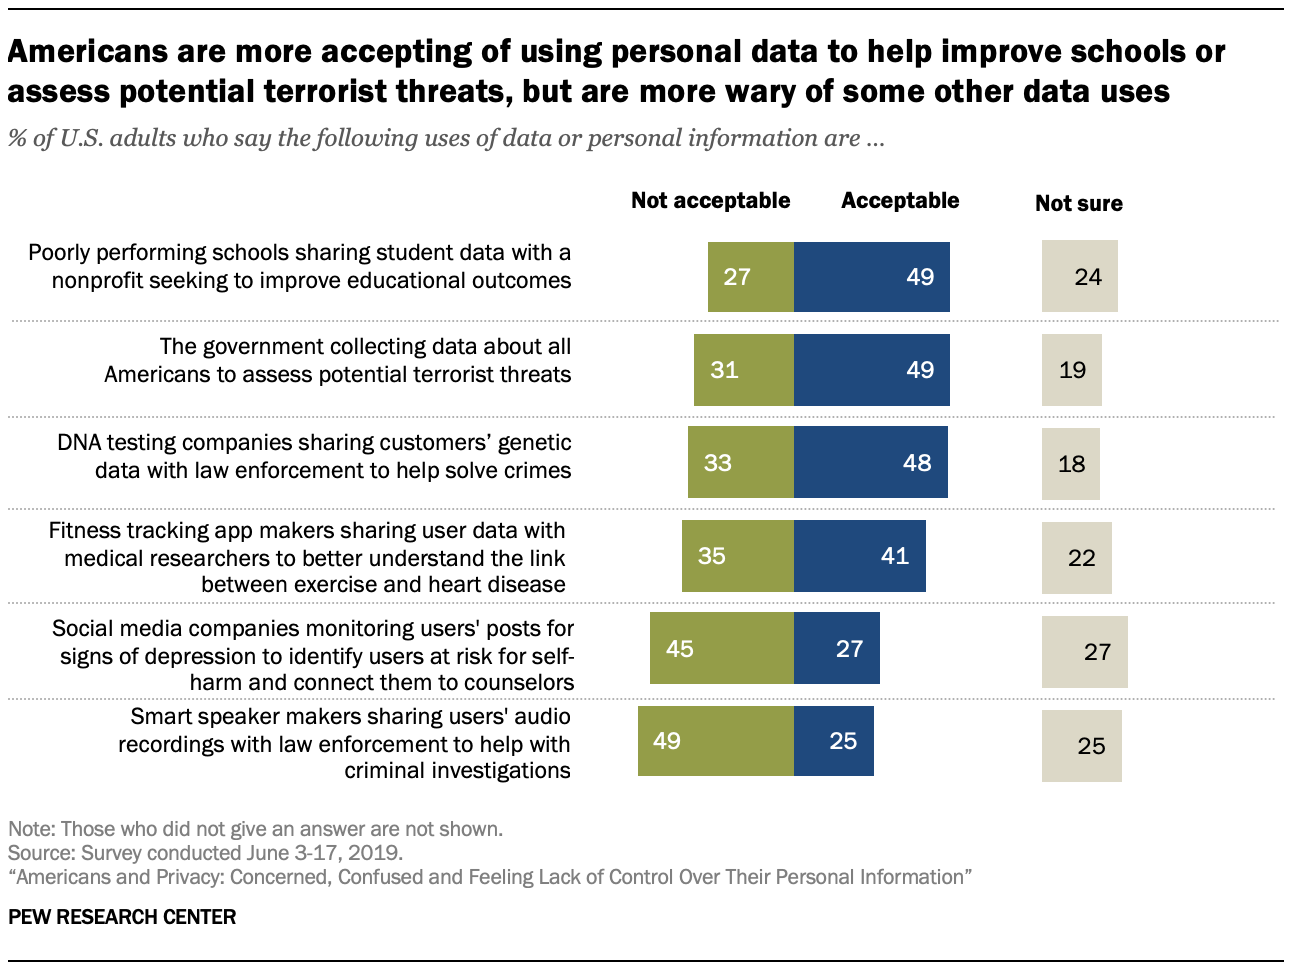 Americans are more accepting of using personal data to help improve schools or assess potential terrorist threats, but are more wary of some other data uses